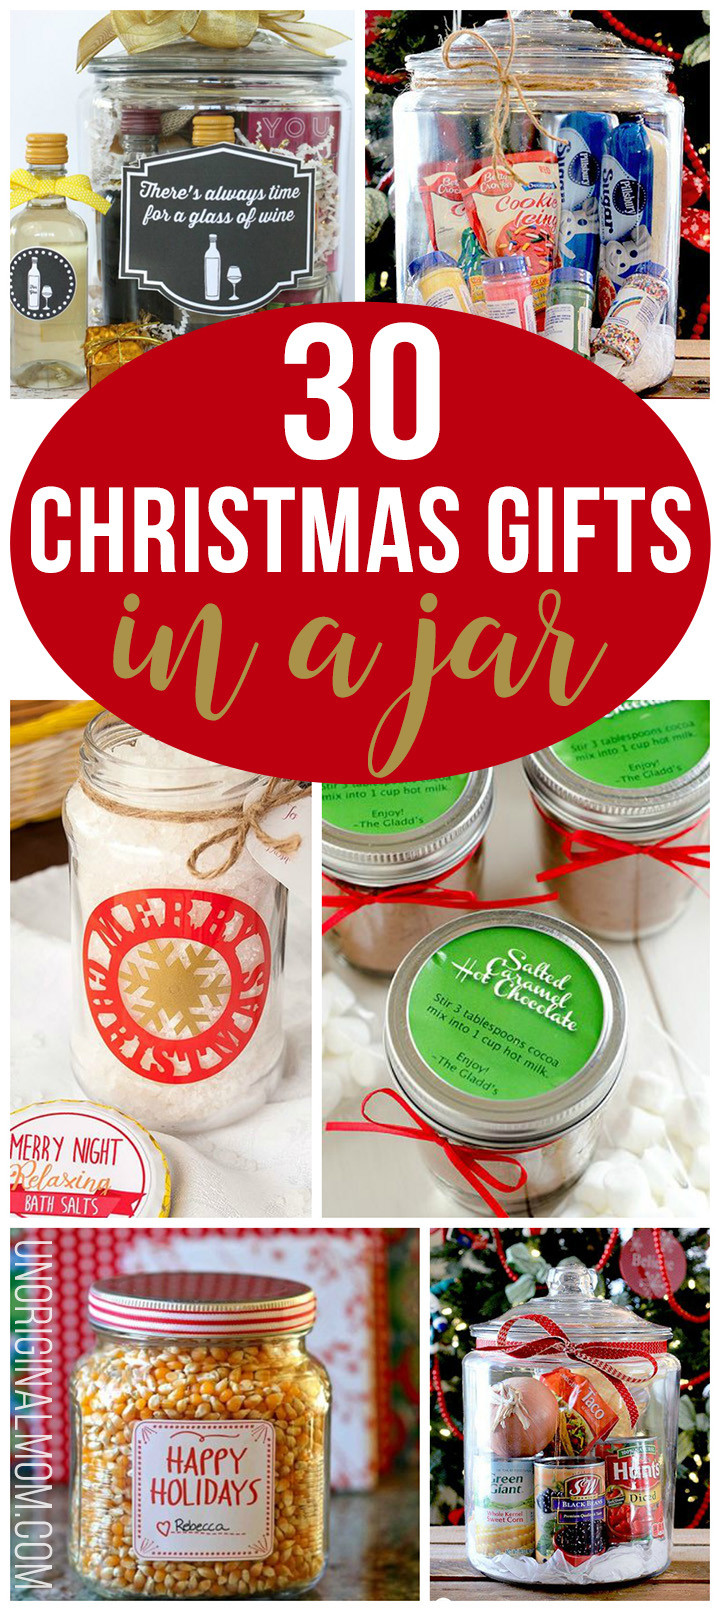 Cool Christmas Gift Ideas
 30 Christmas Gifts in a Jar unOriginal Mom